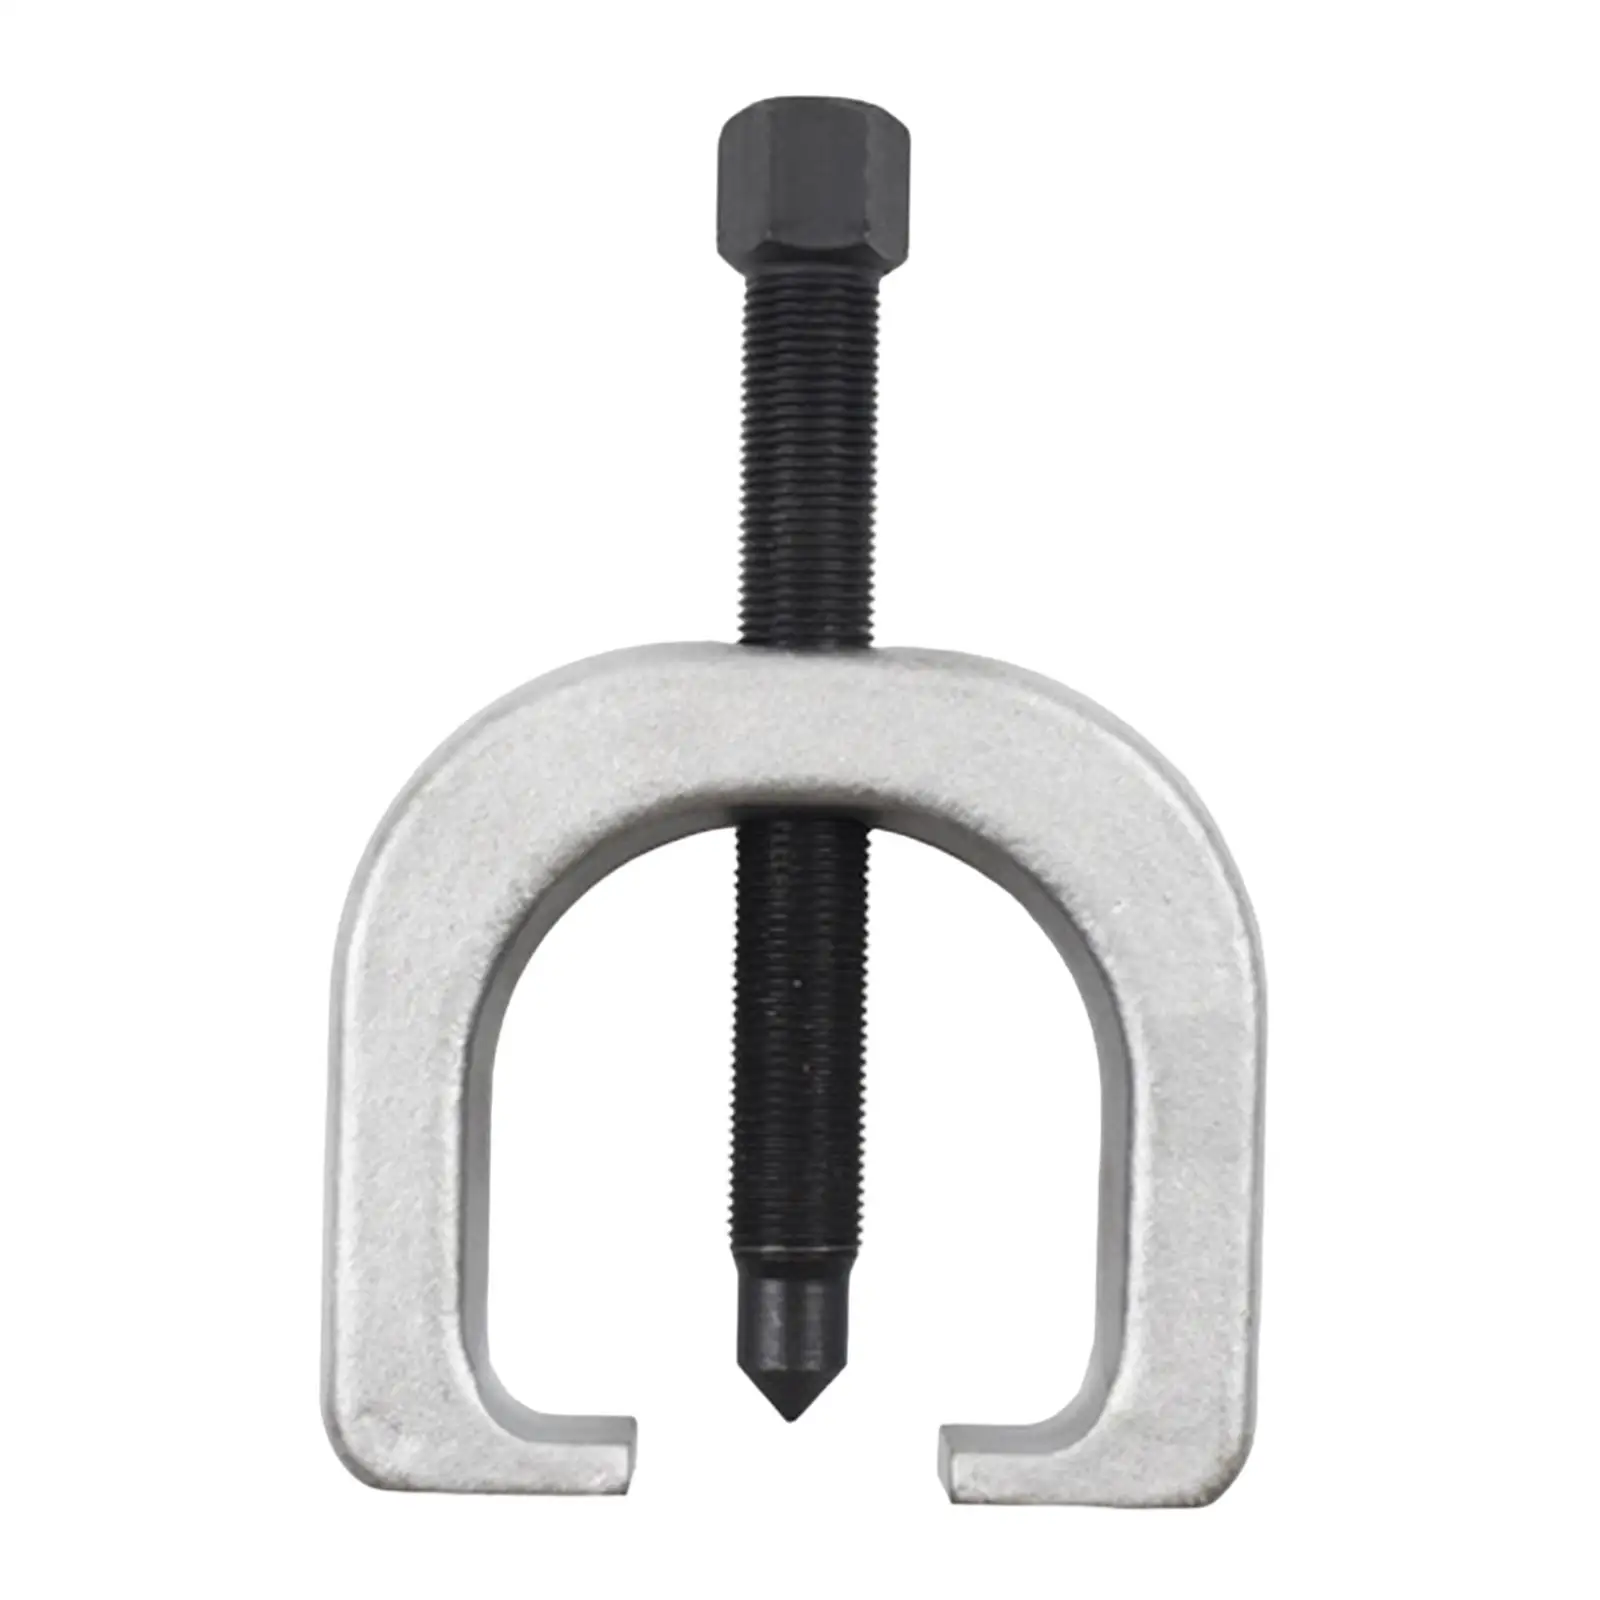 Slack Adjuster Puller Works on Automatic Adjusters Easy to Operate Sturdy Repair Tool Removal Tool for Trucks Trailers